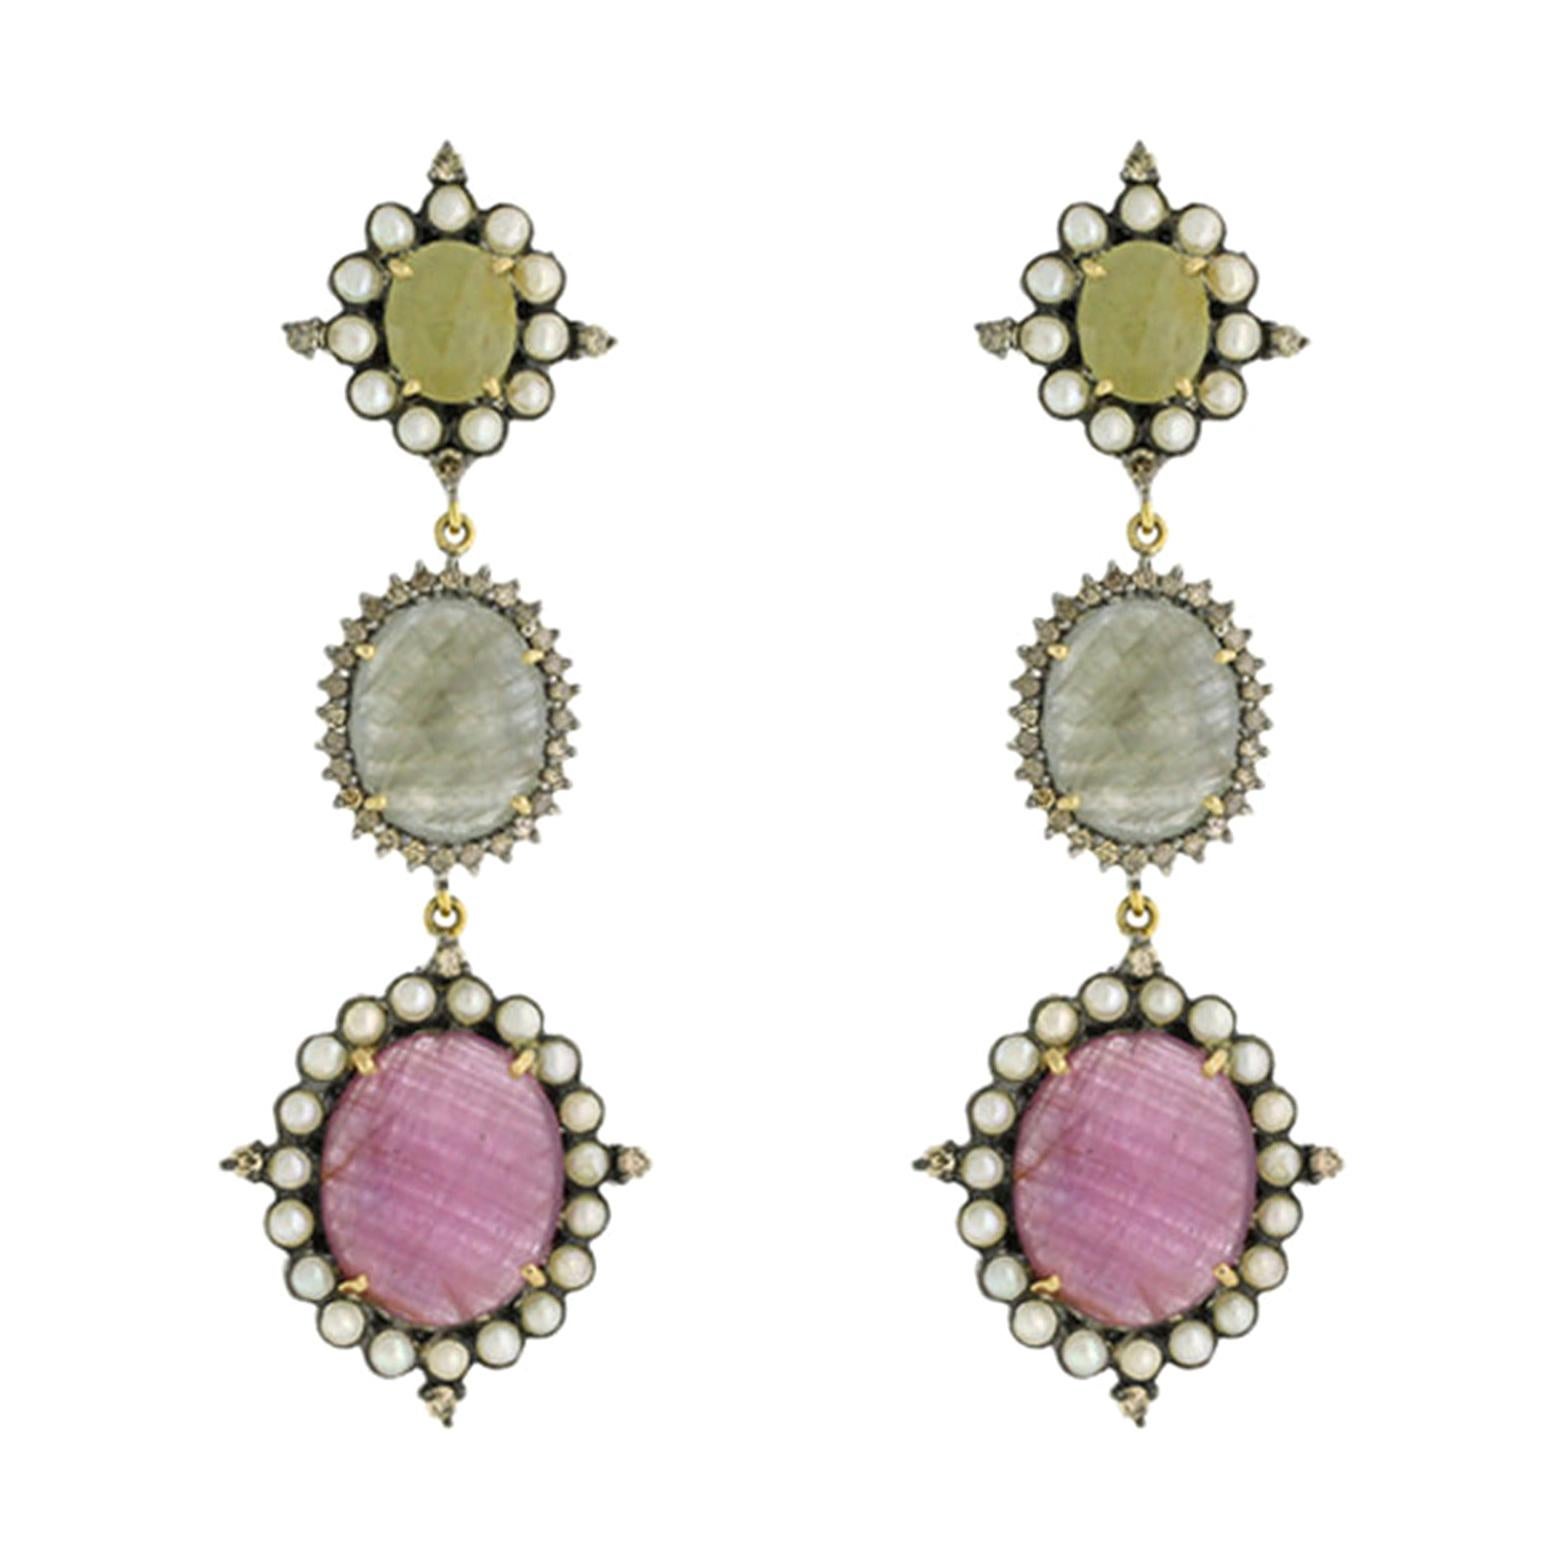 Three-Tier Slice Multicolor Sapphire Earrings Pearls Diamond in Silver and Gold